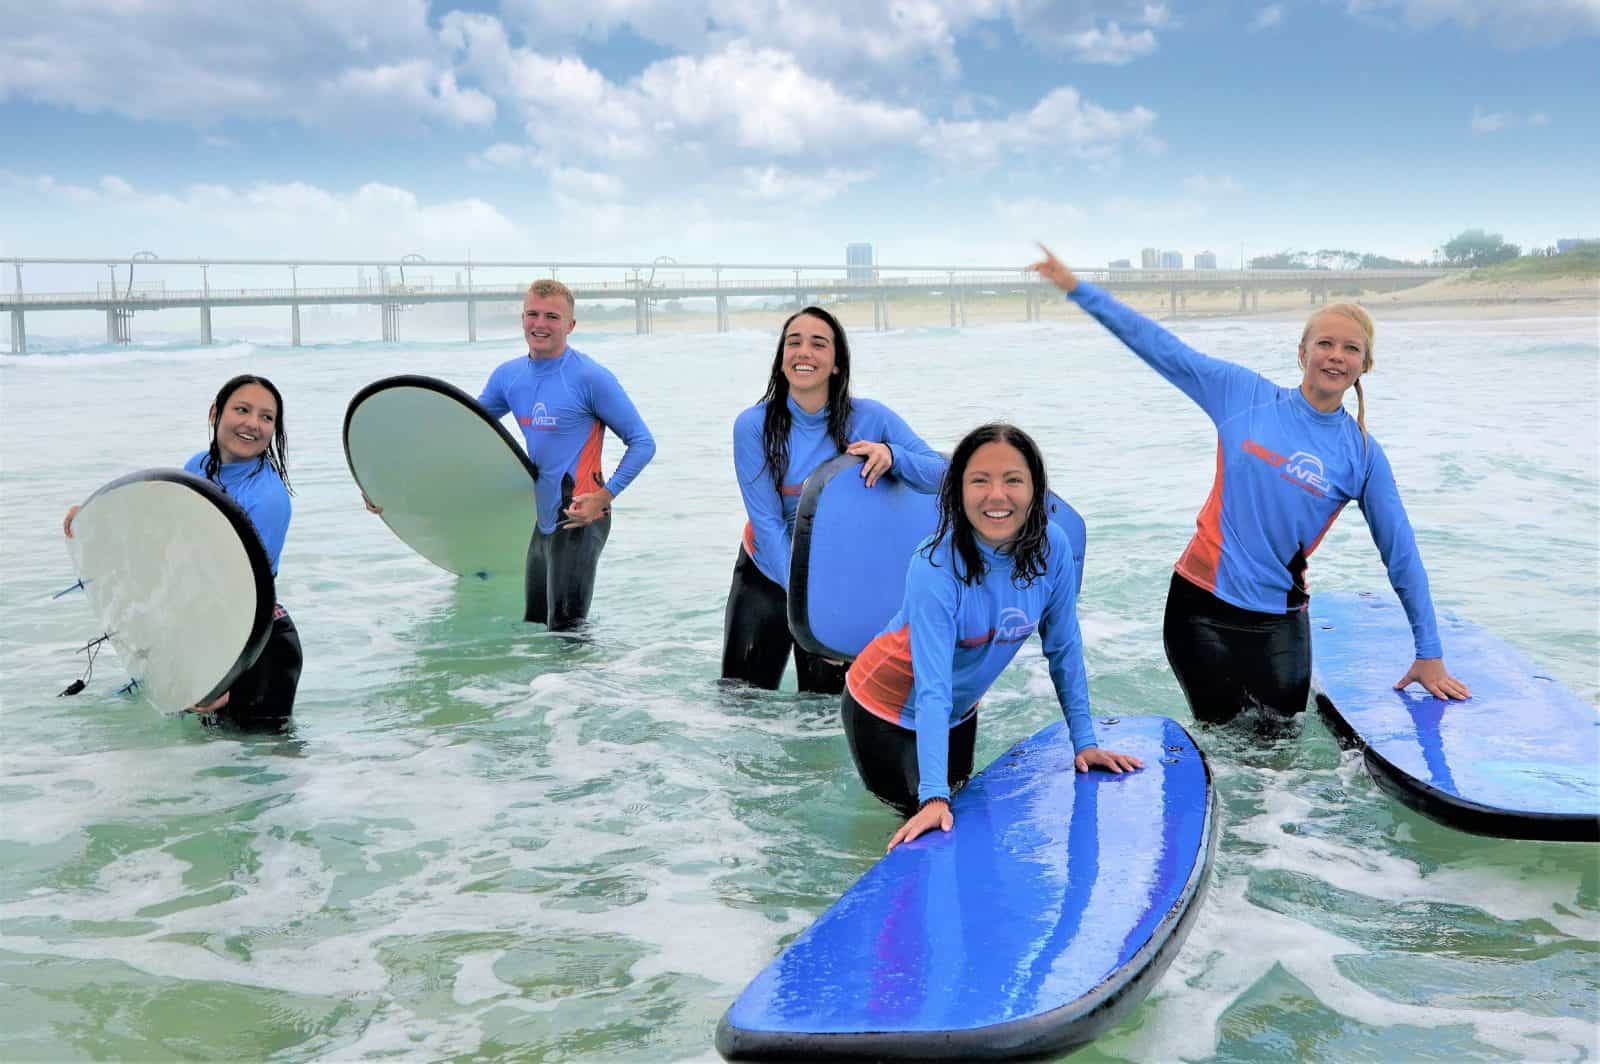 Take part in a group "Learn to Surf" lesson!